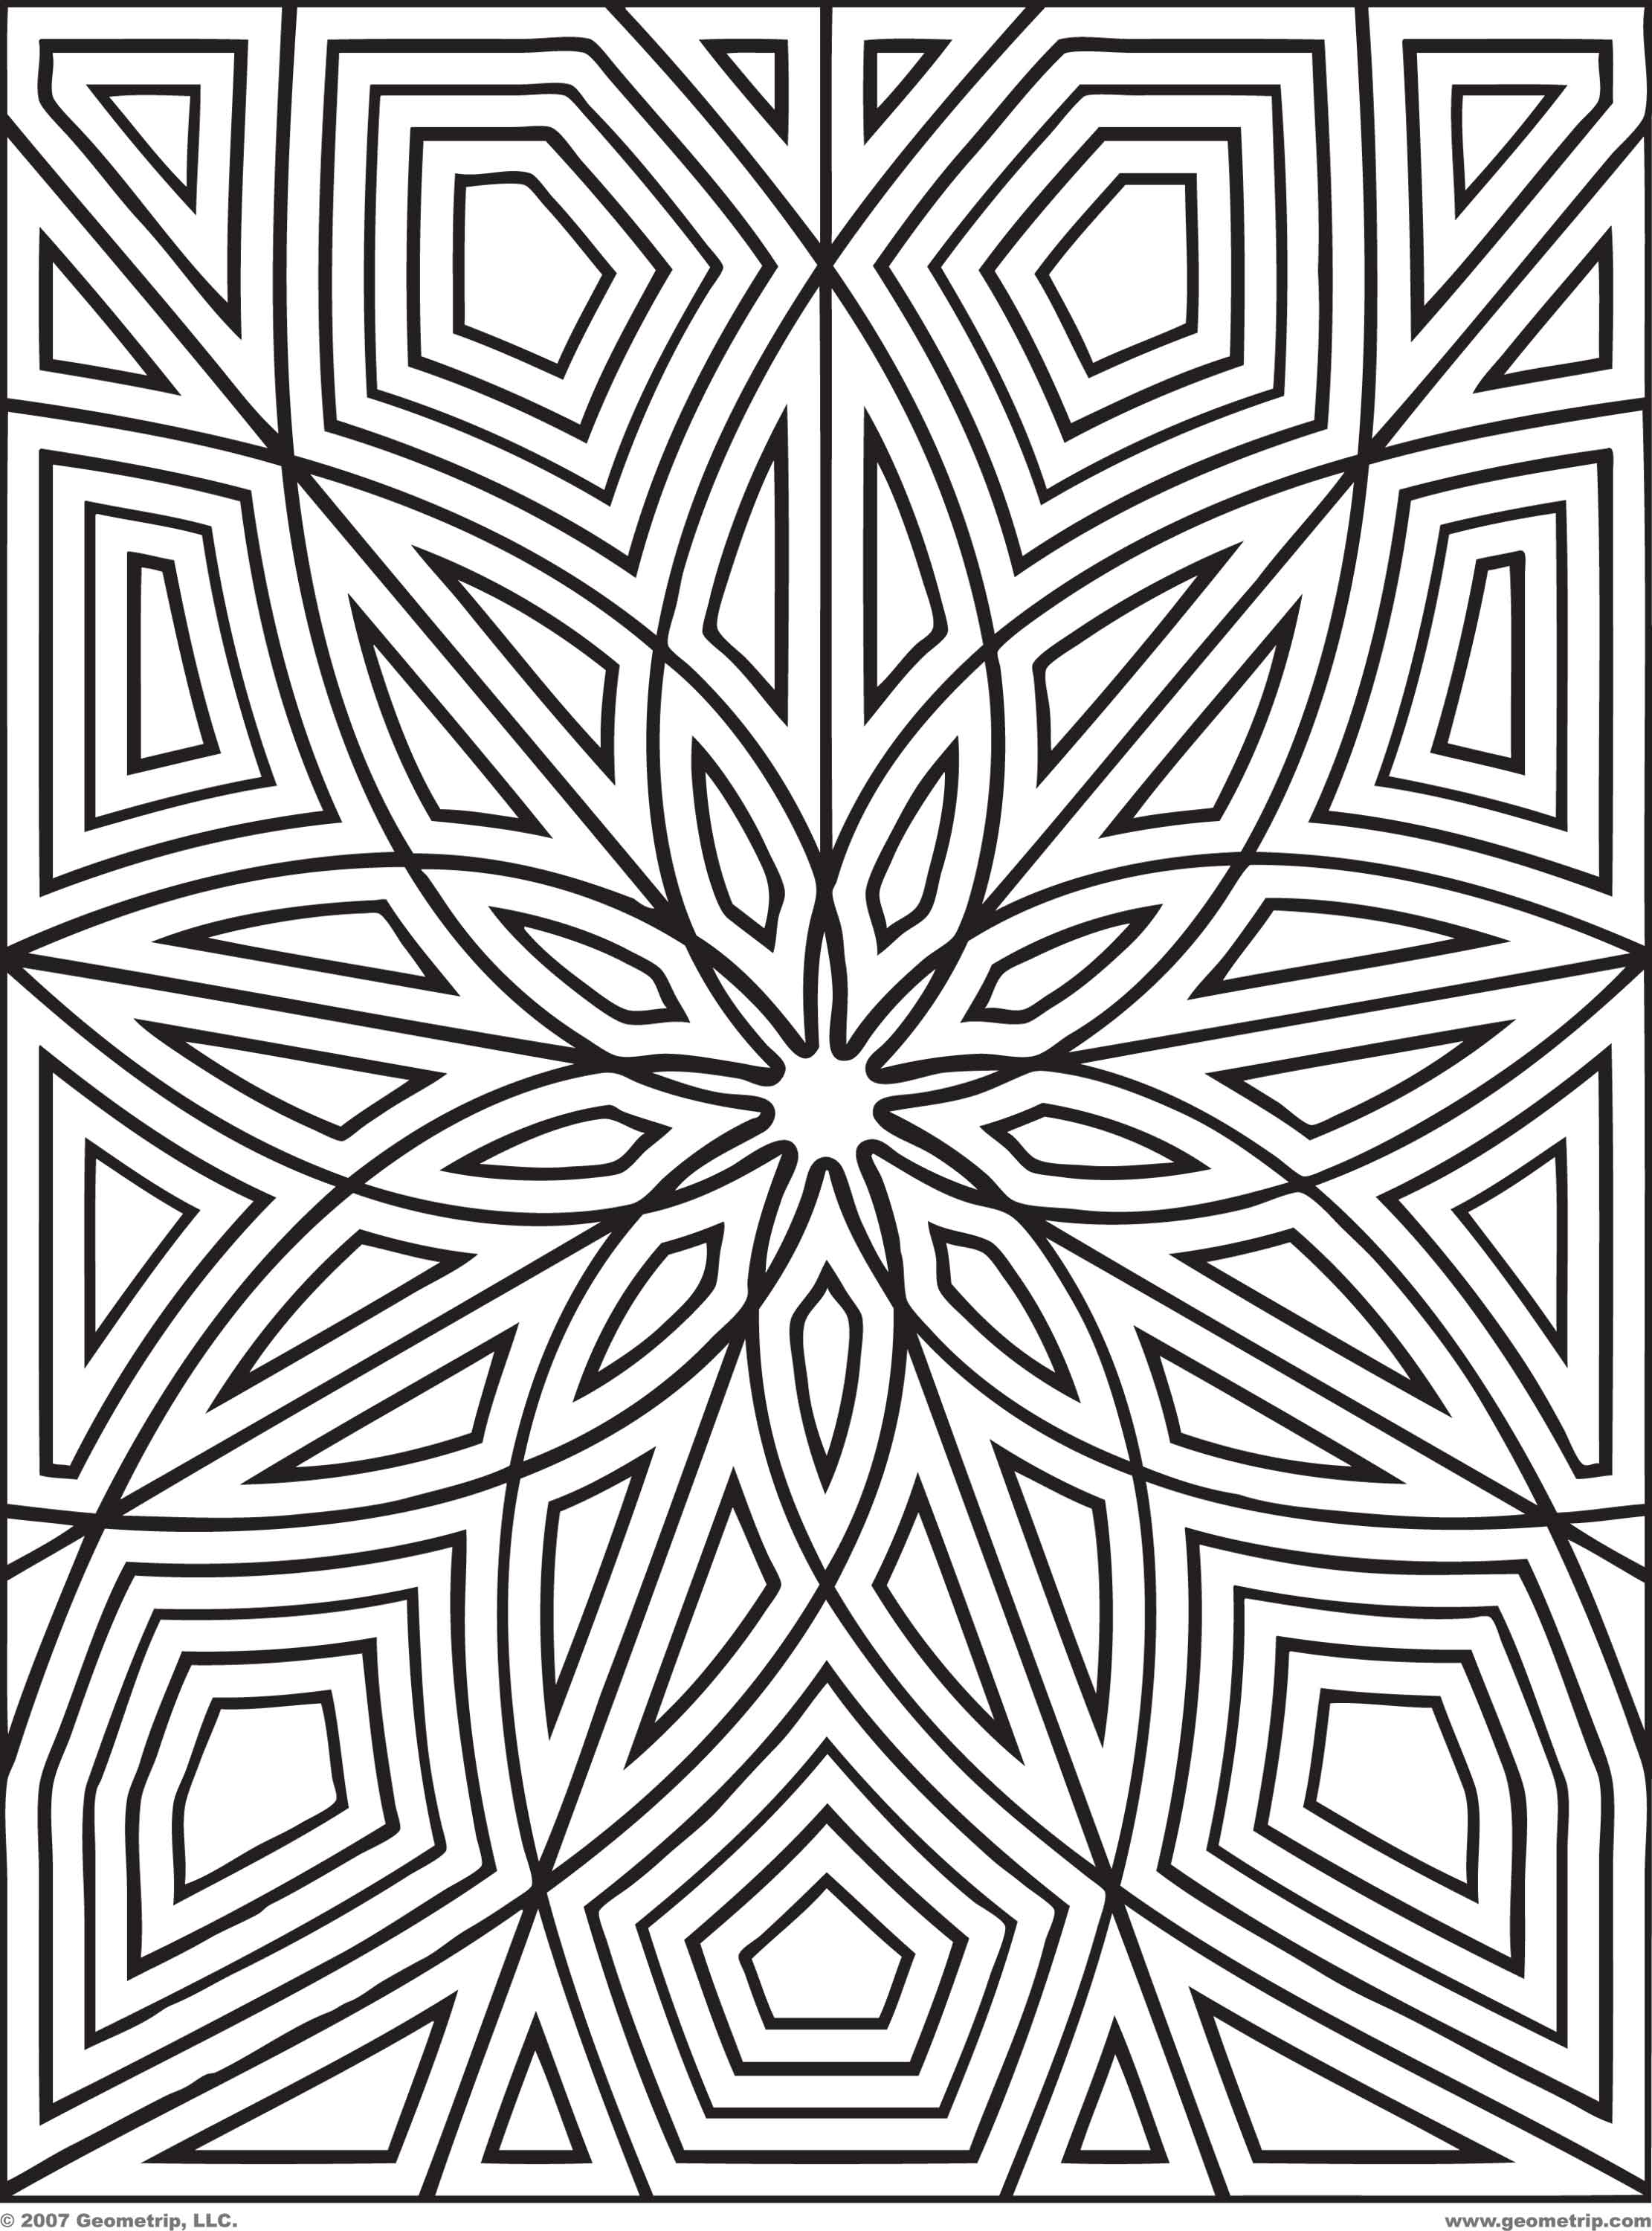 Awesome Design Mandala Coloring Pages Free Printable - Coloring Home